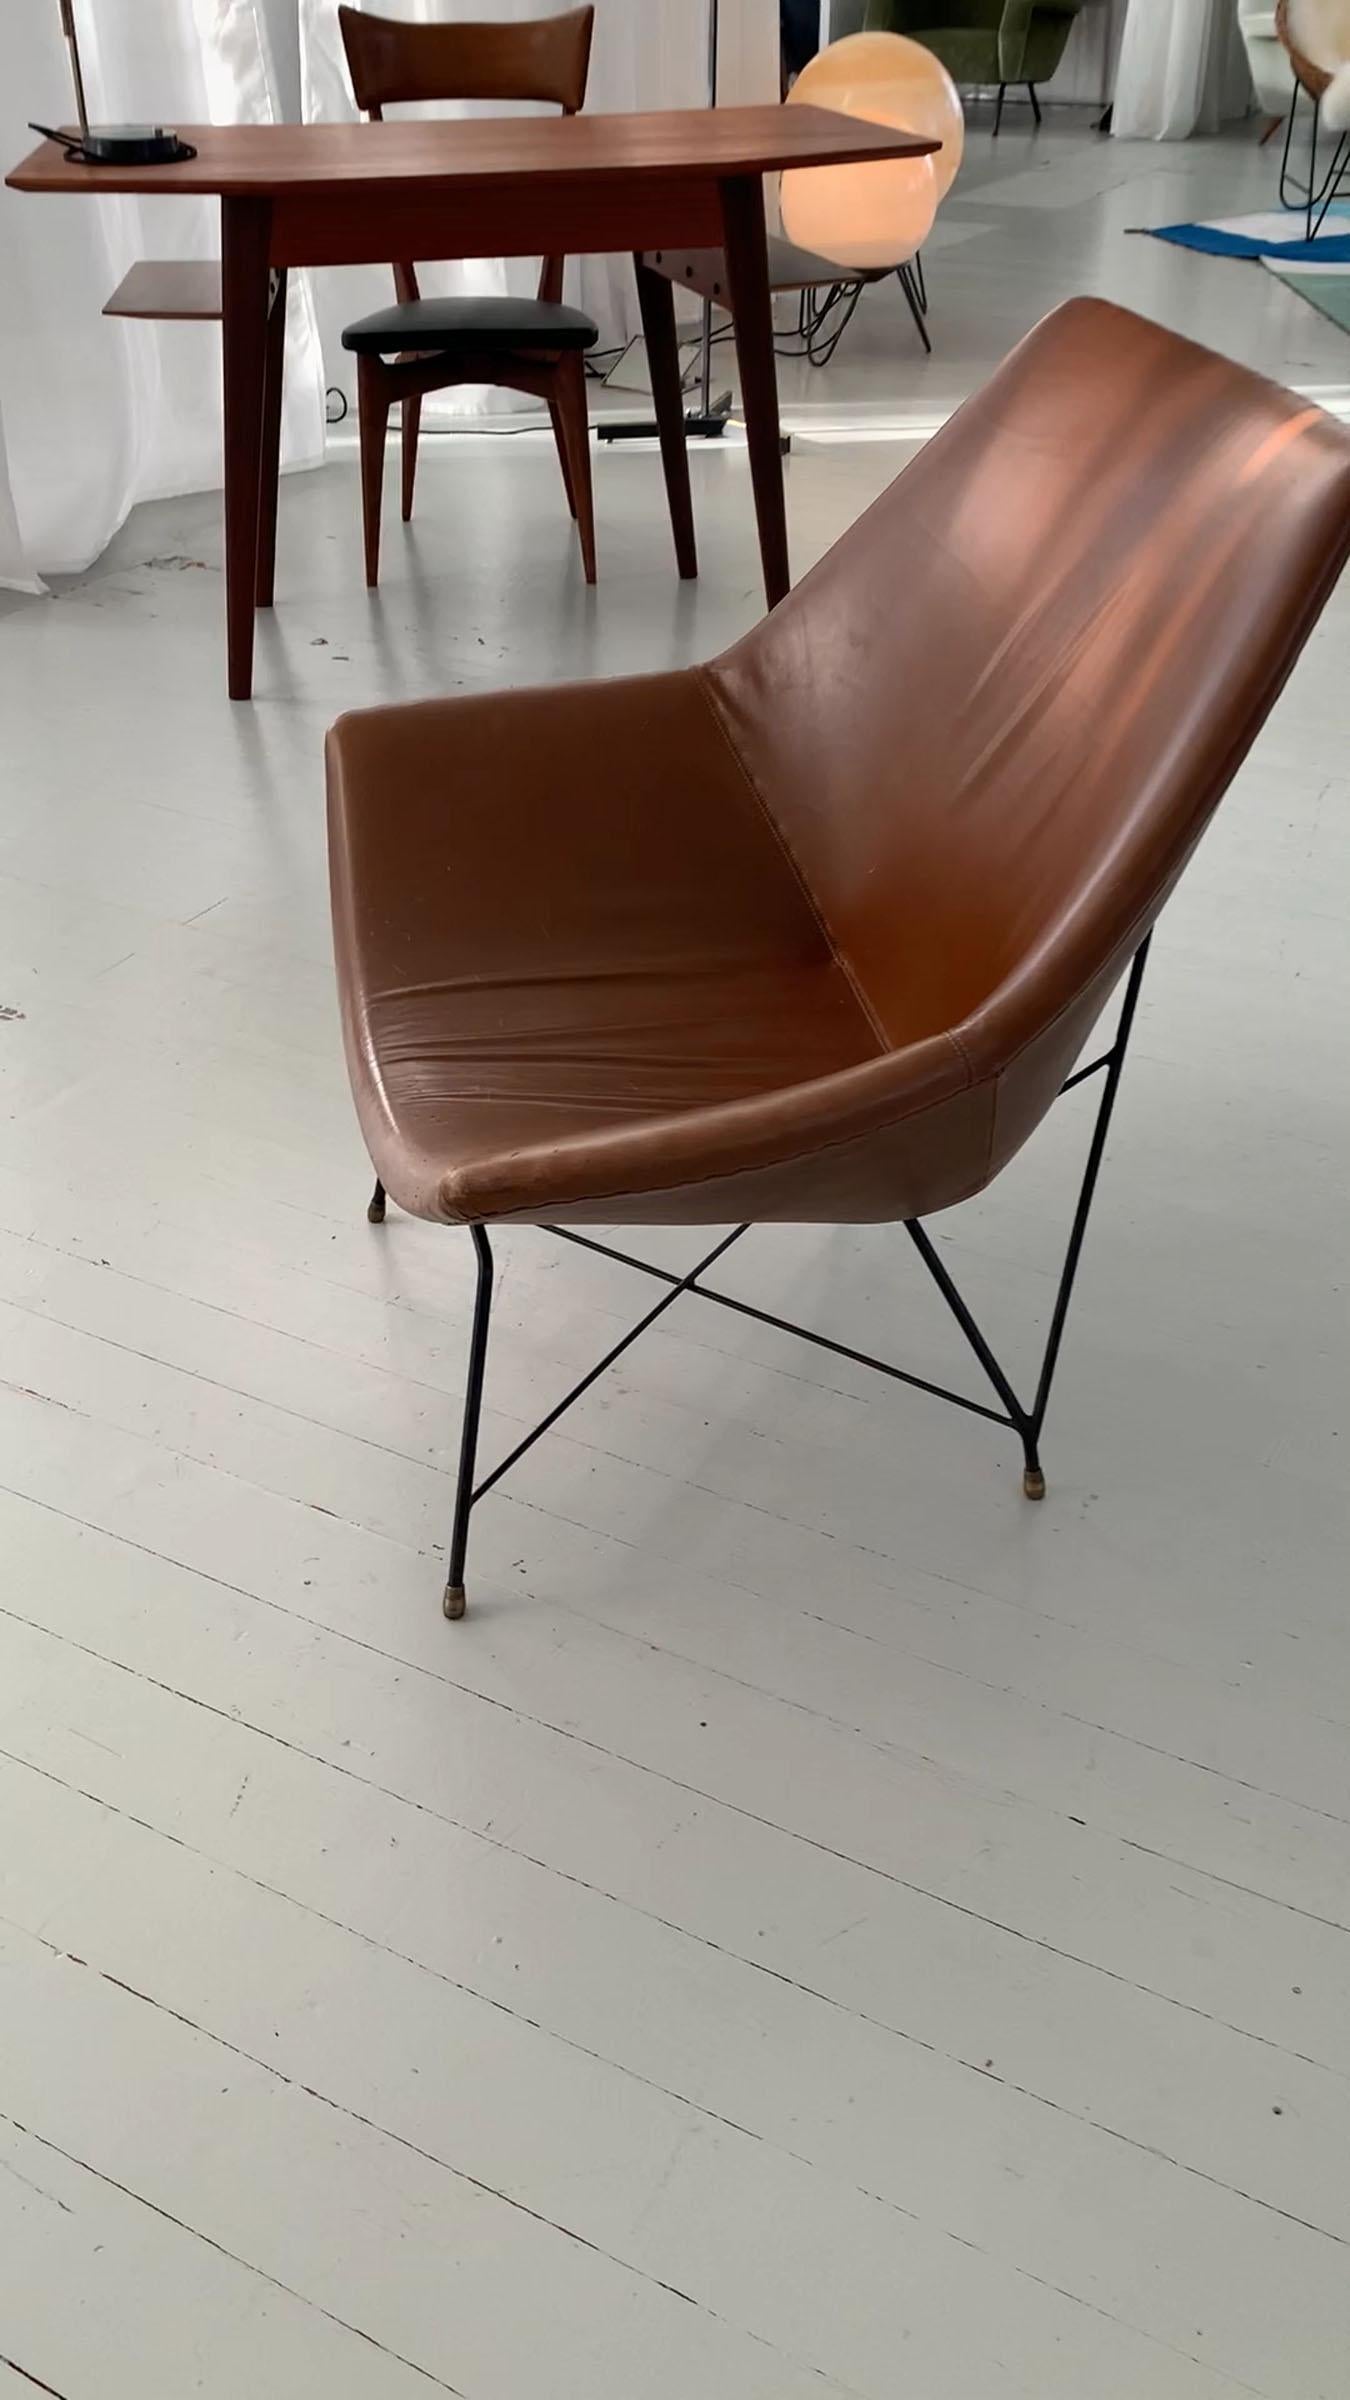 Italian Brown Leather Kosmos Chair Design by Augusto Bozzi for Saporiti, 1954 For Sale 4